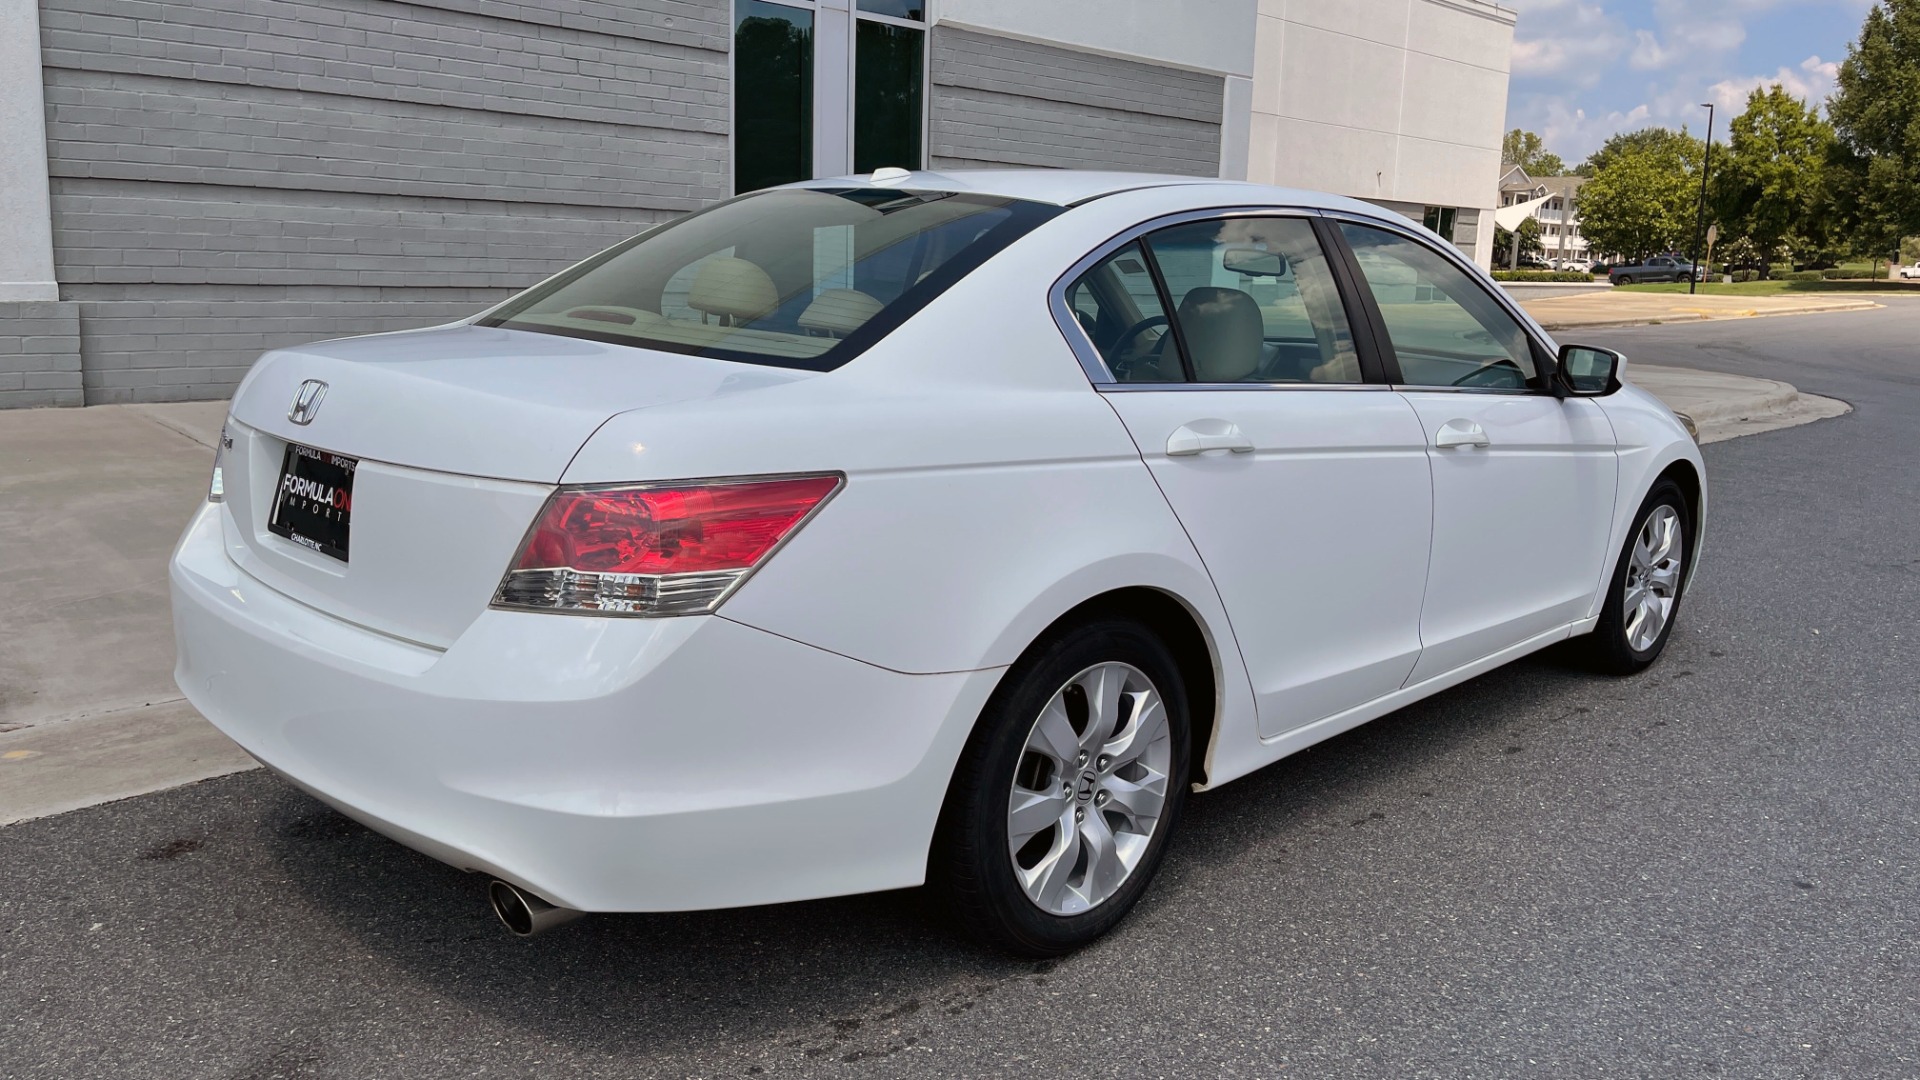 Used 2009 Honda ACCORD EX-L 4DR / 2.4L / AUTO / SUNROOF / ANC / DUAL-ZONE AUTO A/C for sale Sold at Formula Imports in Charlotte NC 28227 2